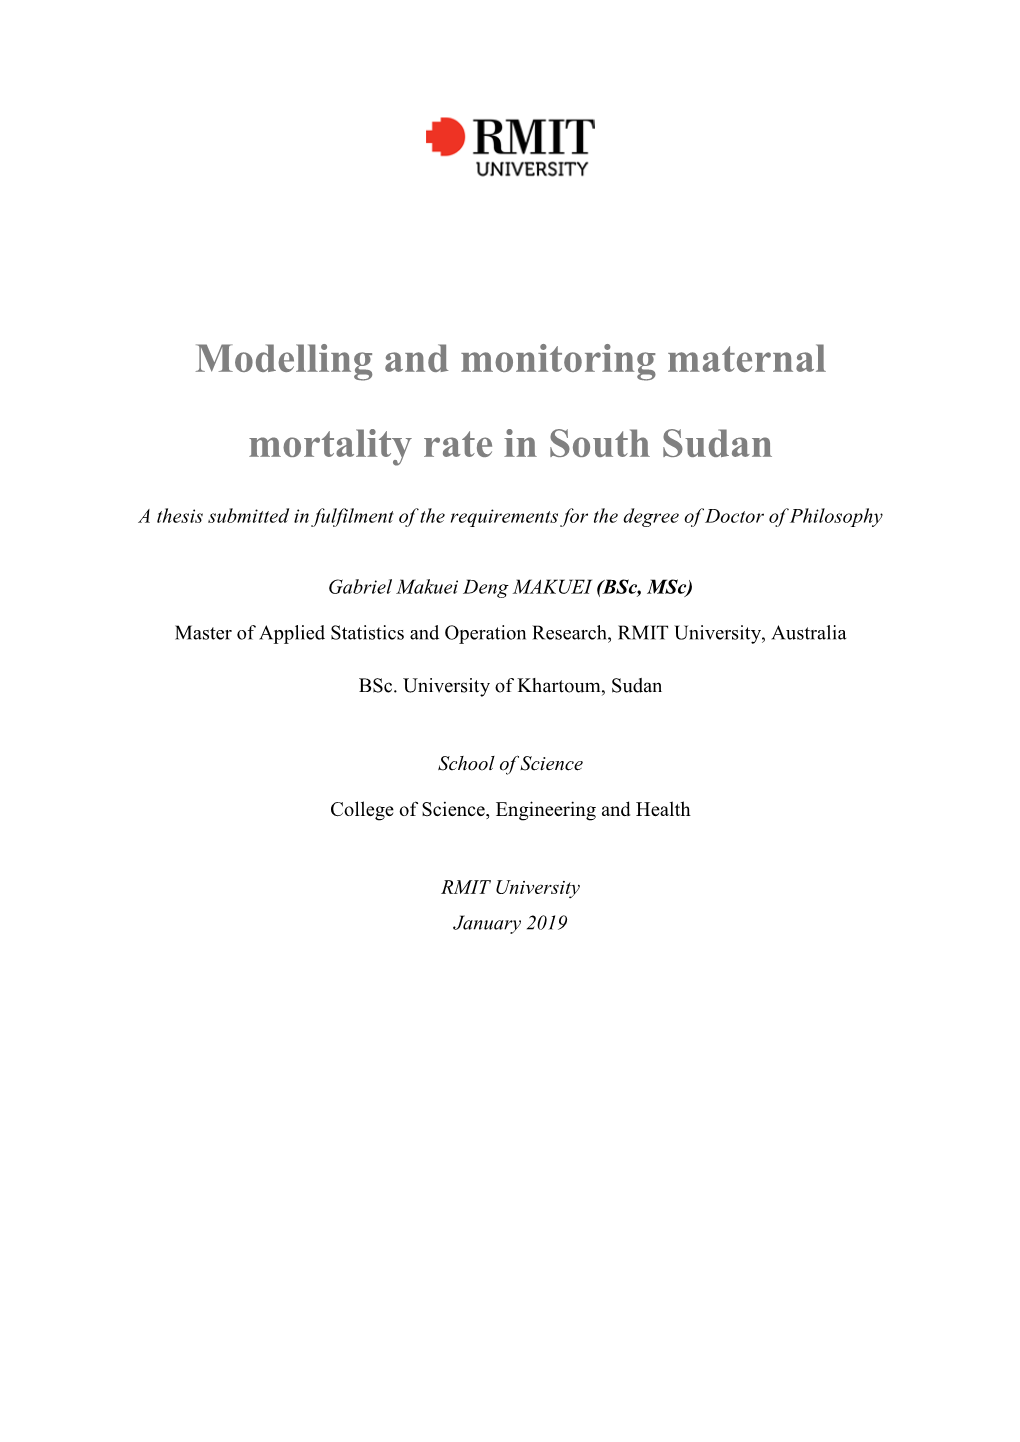 Modelling and Monitoring Maternal Mortality Rate in South Sudan